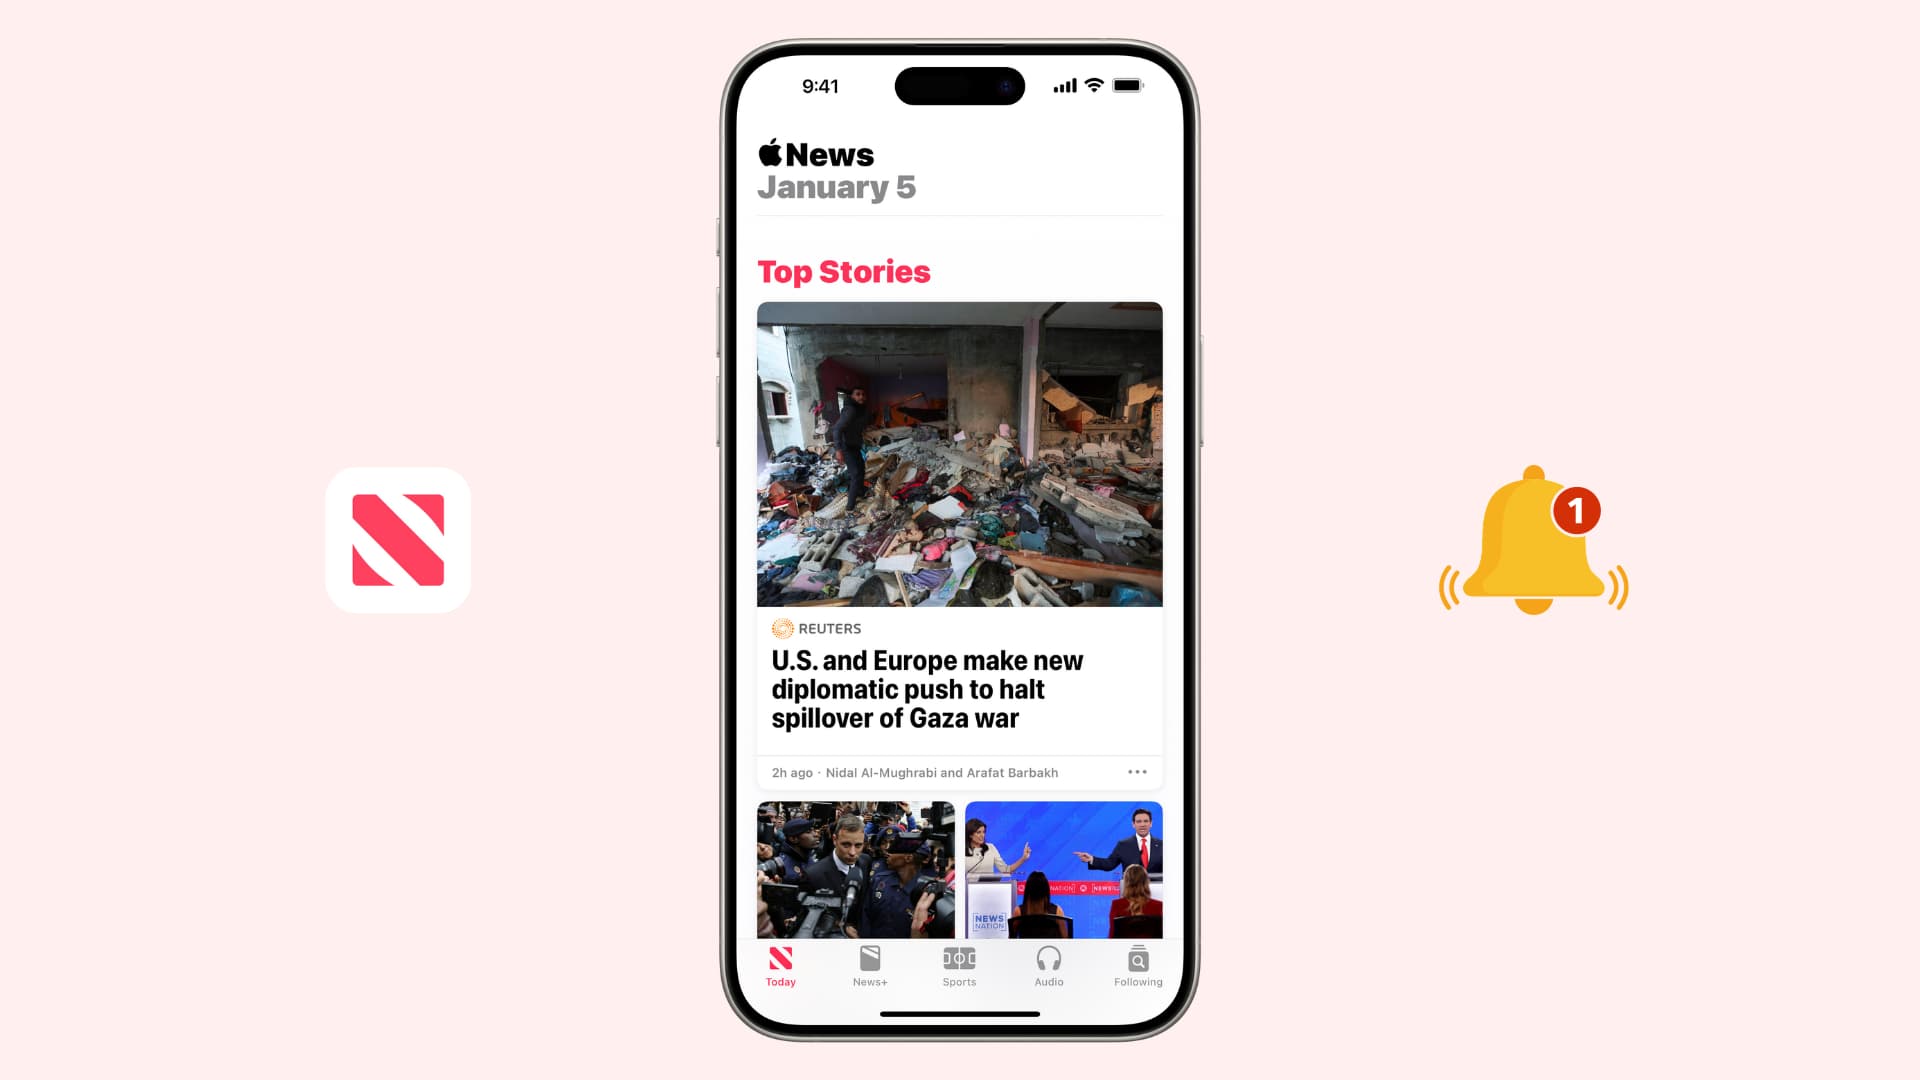 iPhone showing Top Stories in the Apple News app with icons for News and Notifications